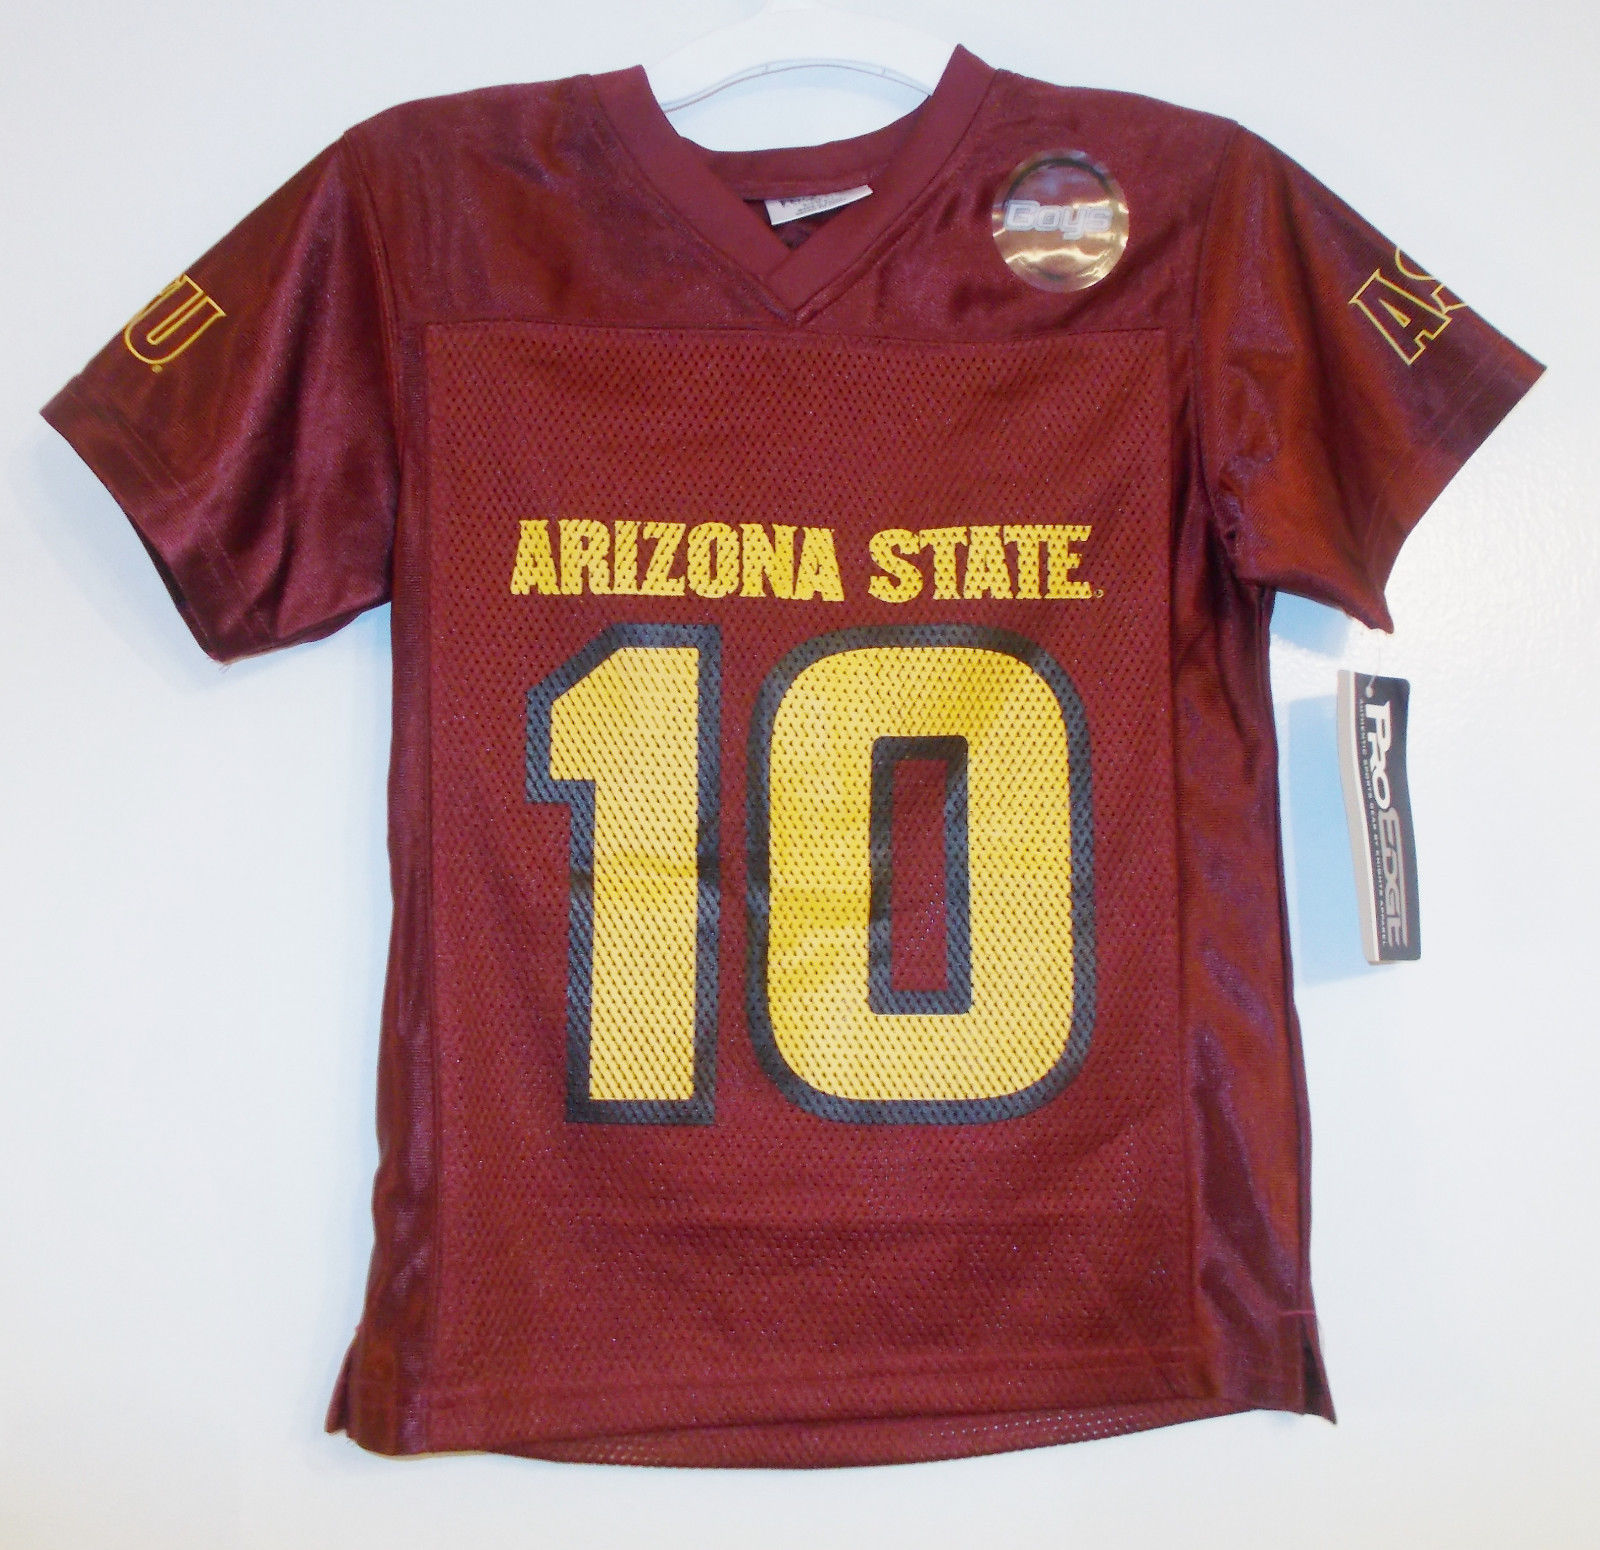 Primary image for ProEdge Arizona State Sun Devils Boys Jersey Sizes XS 4-5 Sm 6-7 Lg 12-14 NWT